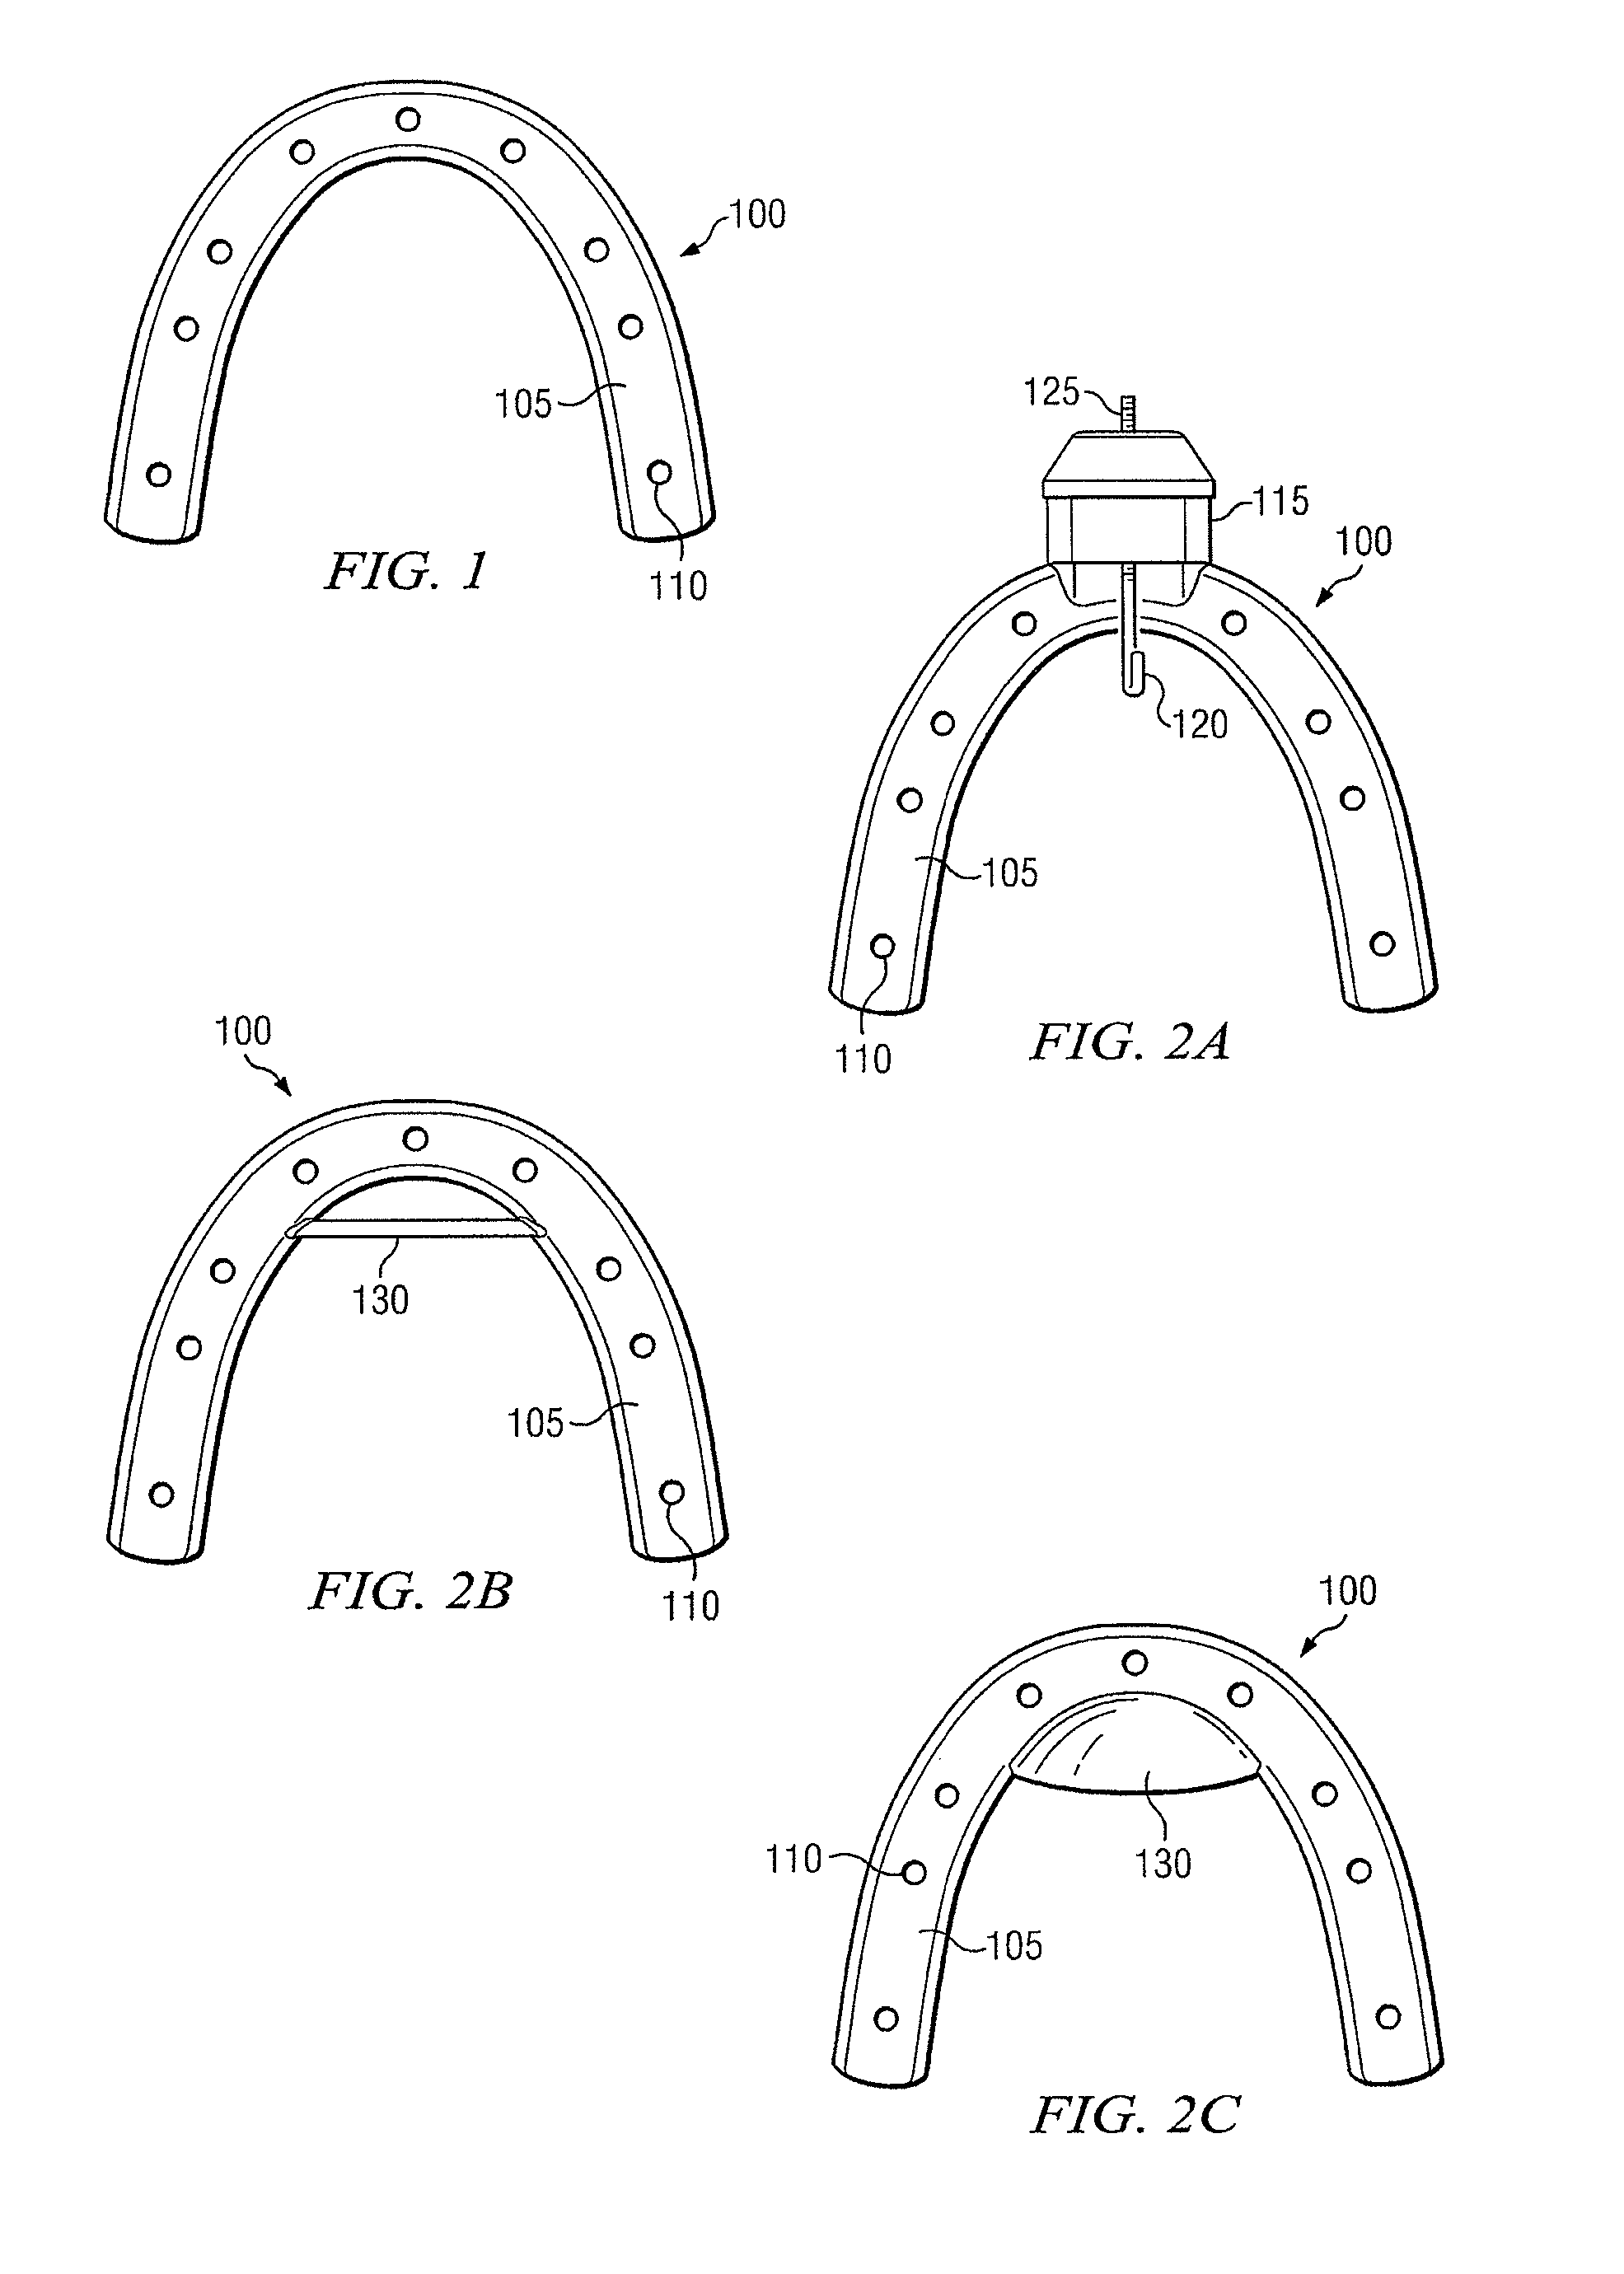 Universal oral appliance with a universal coupler